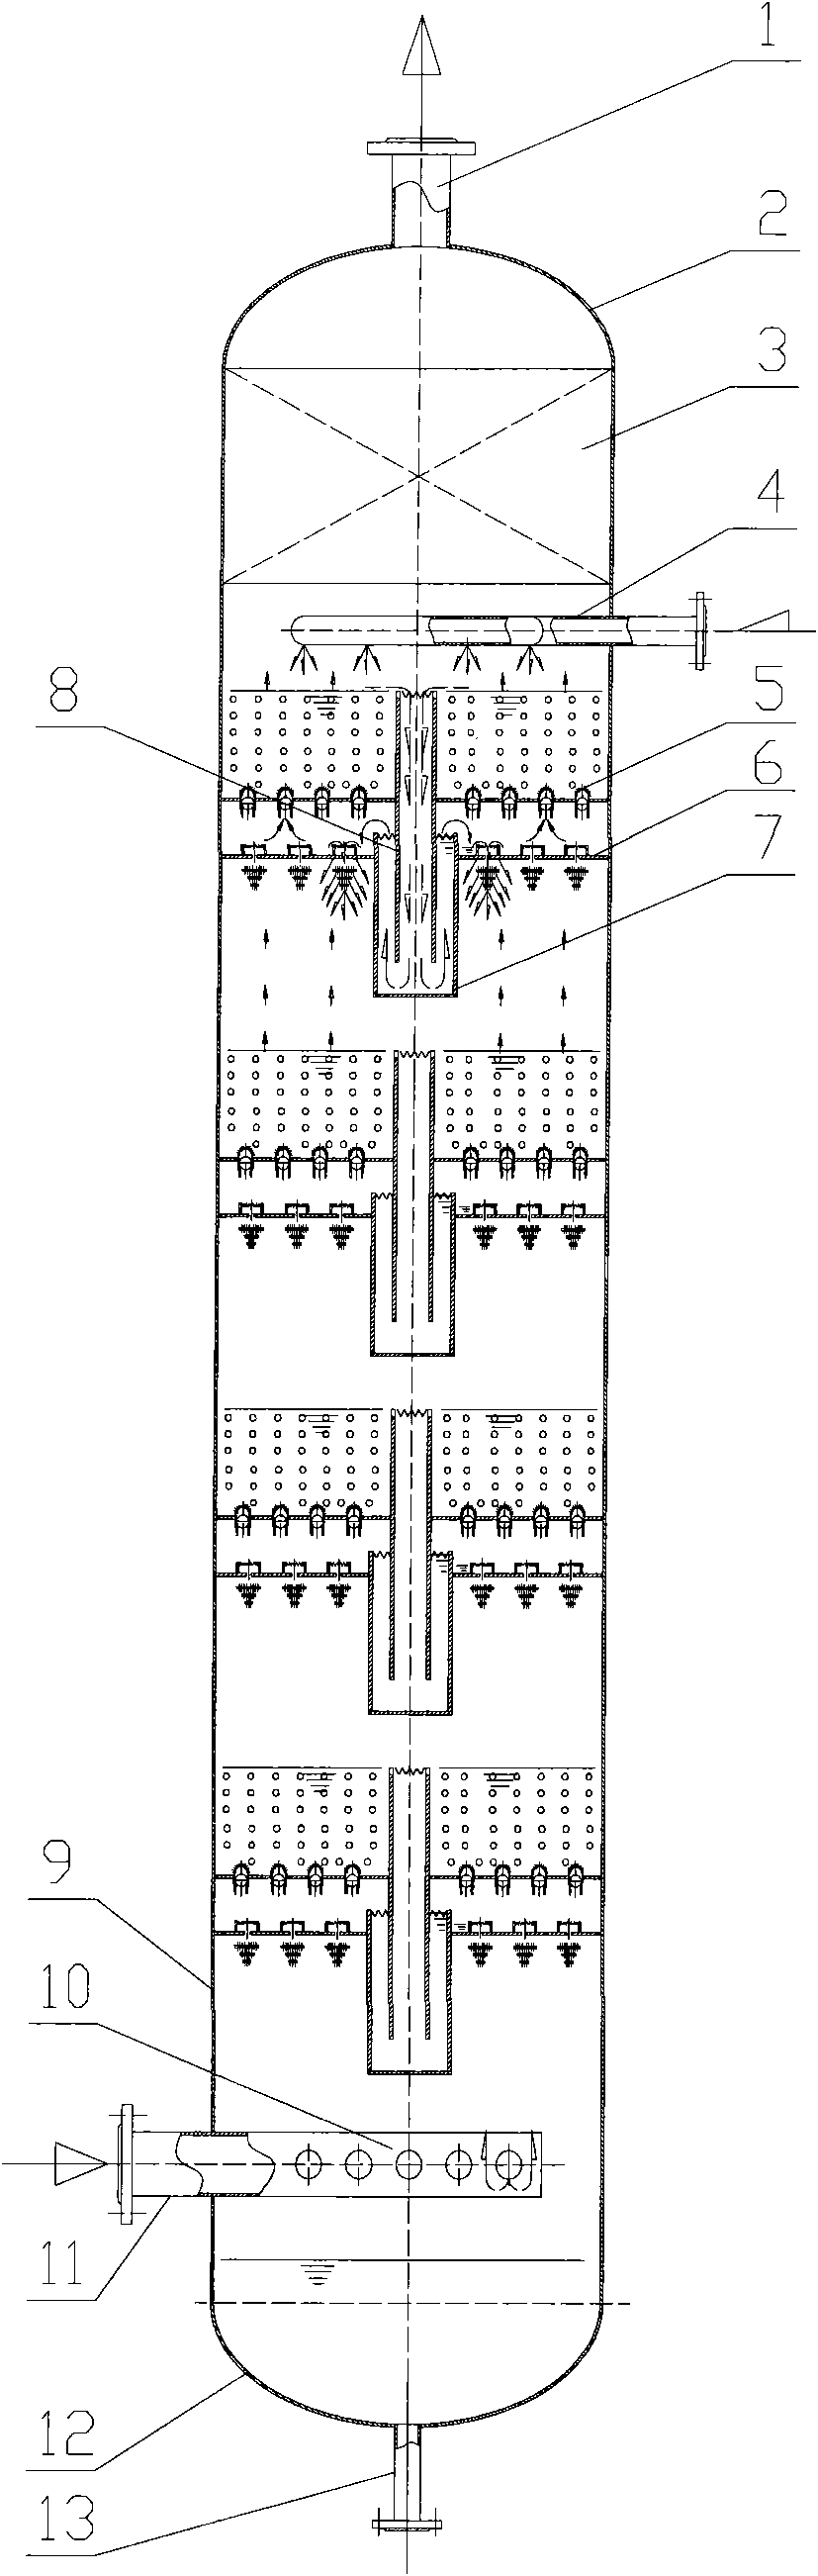 Method for processing light hydrocarbons oxidation sweetening tail gas